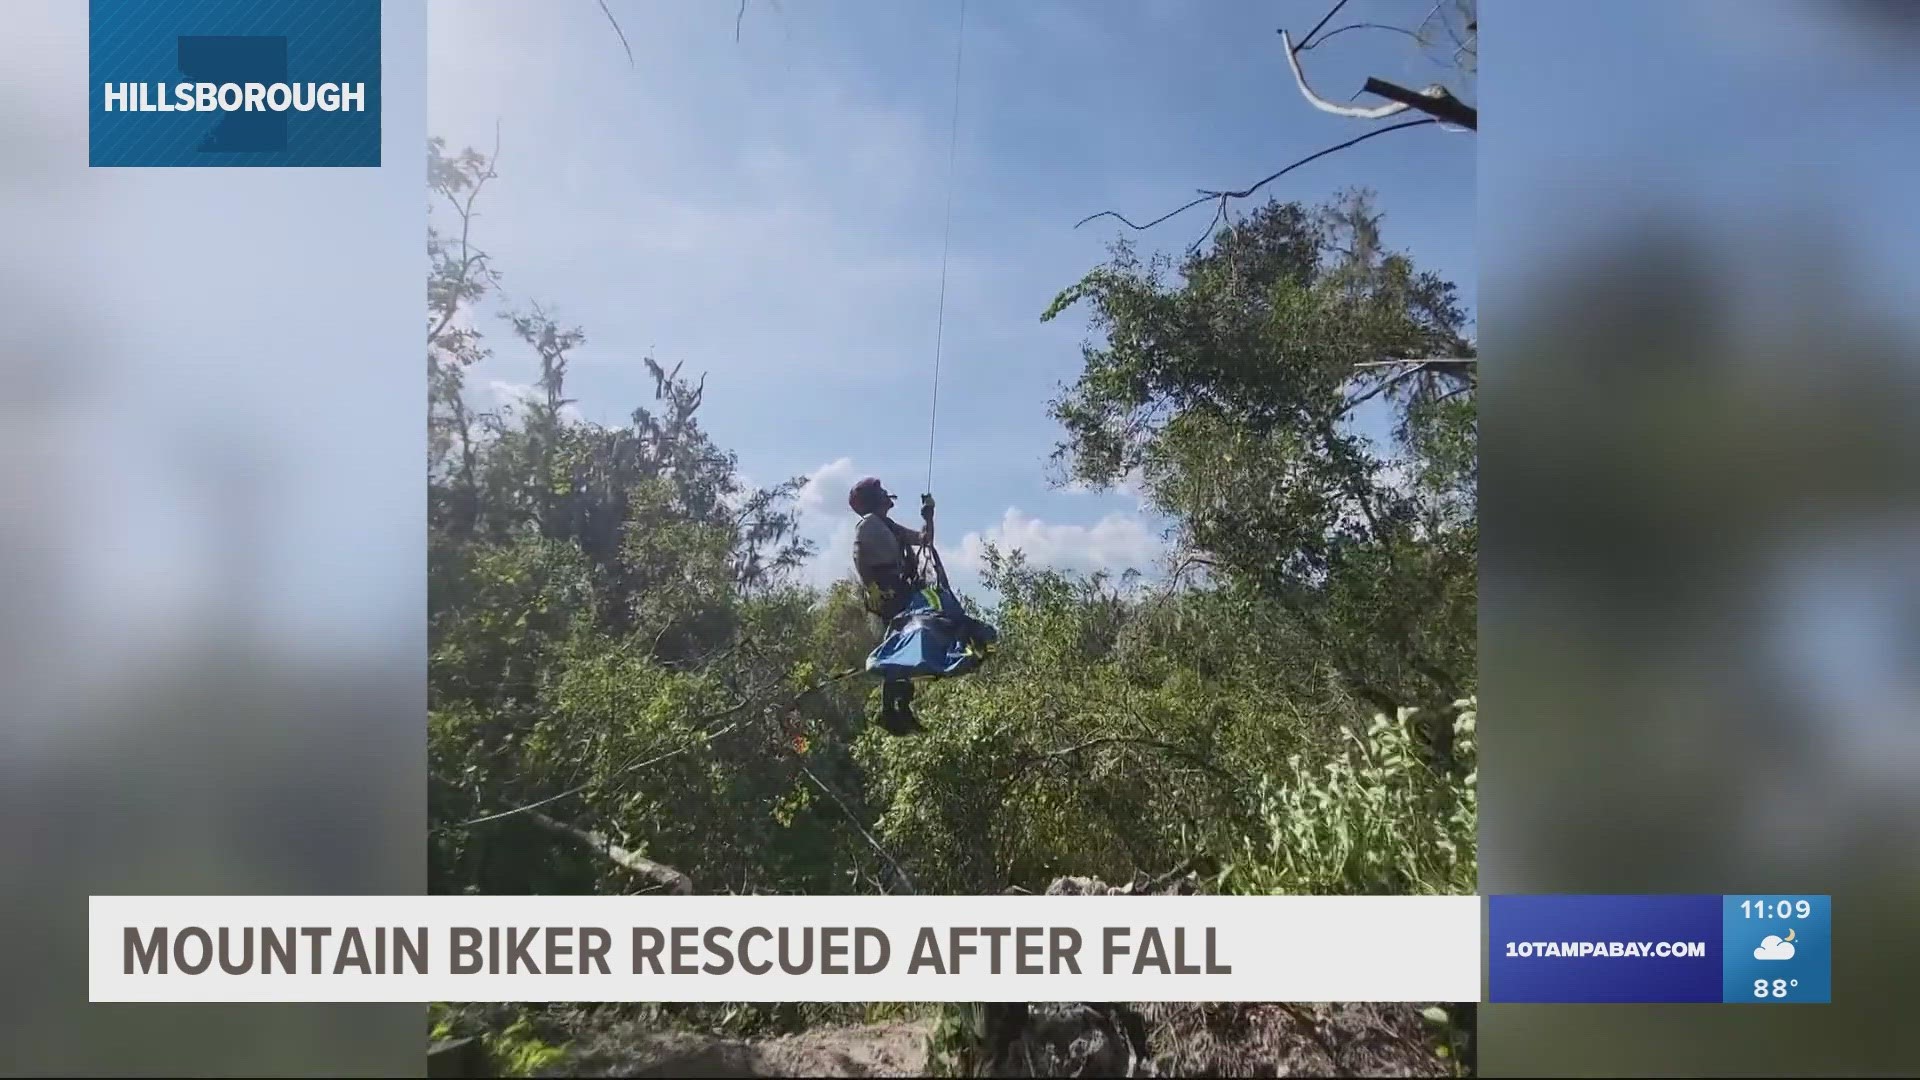 Firefighters used a helicopter from the Hillsborough County Sheriff's Office to help with the rescue.